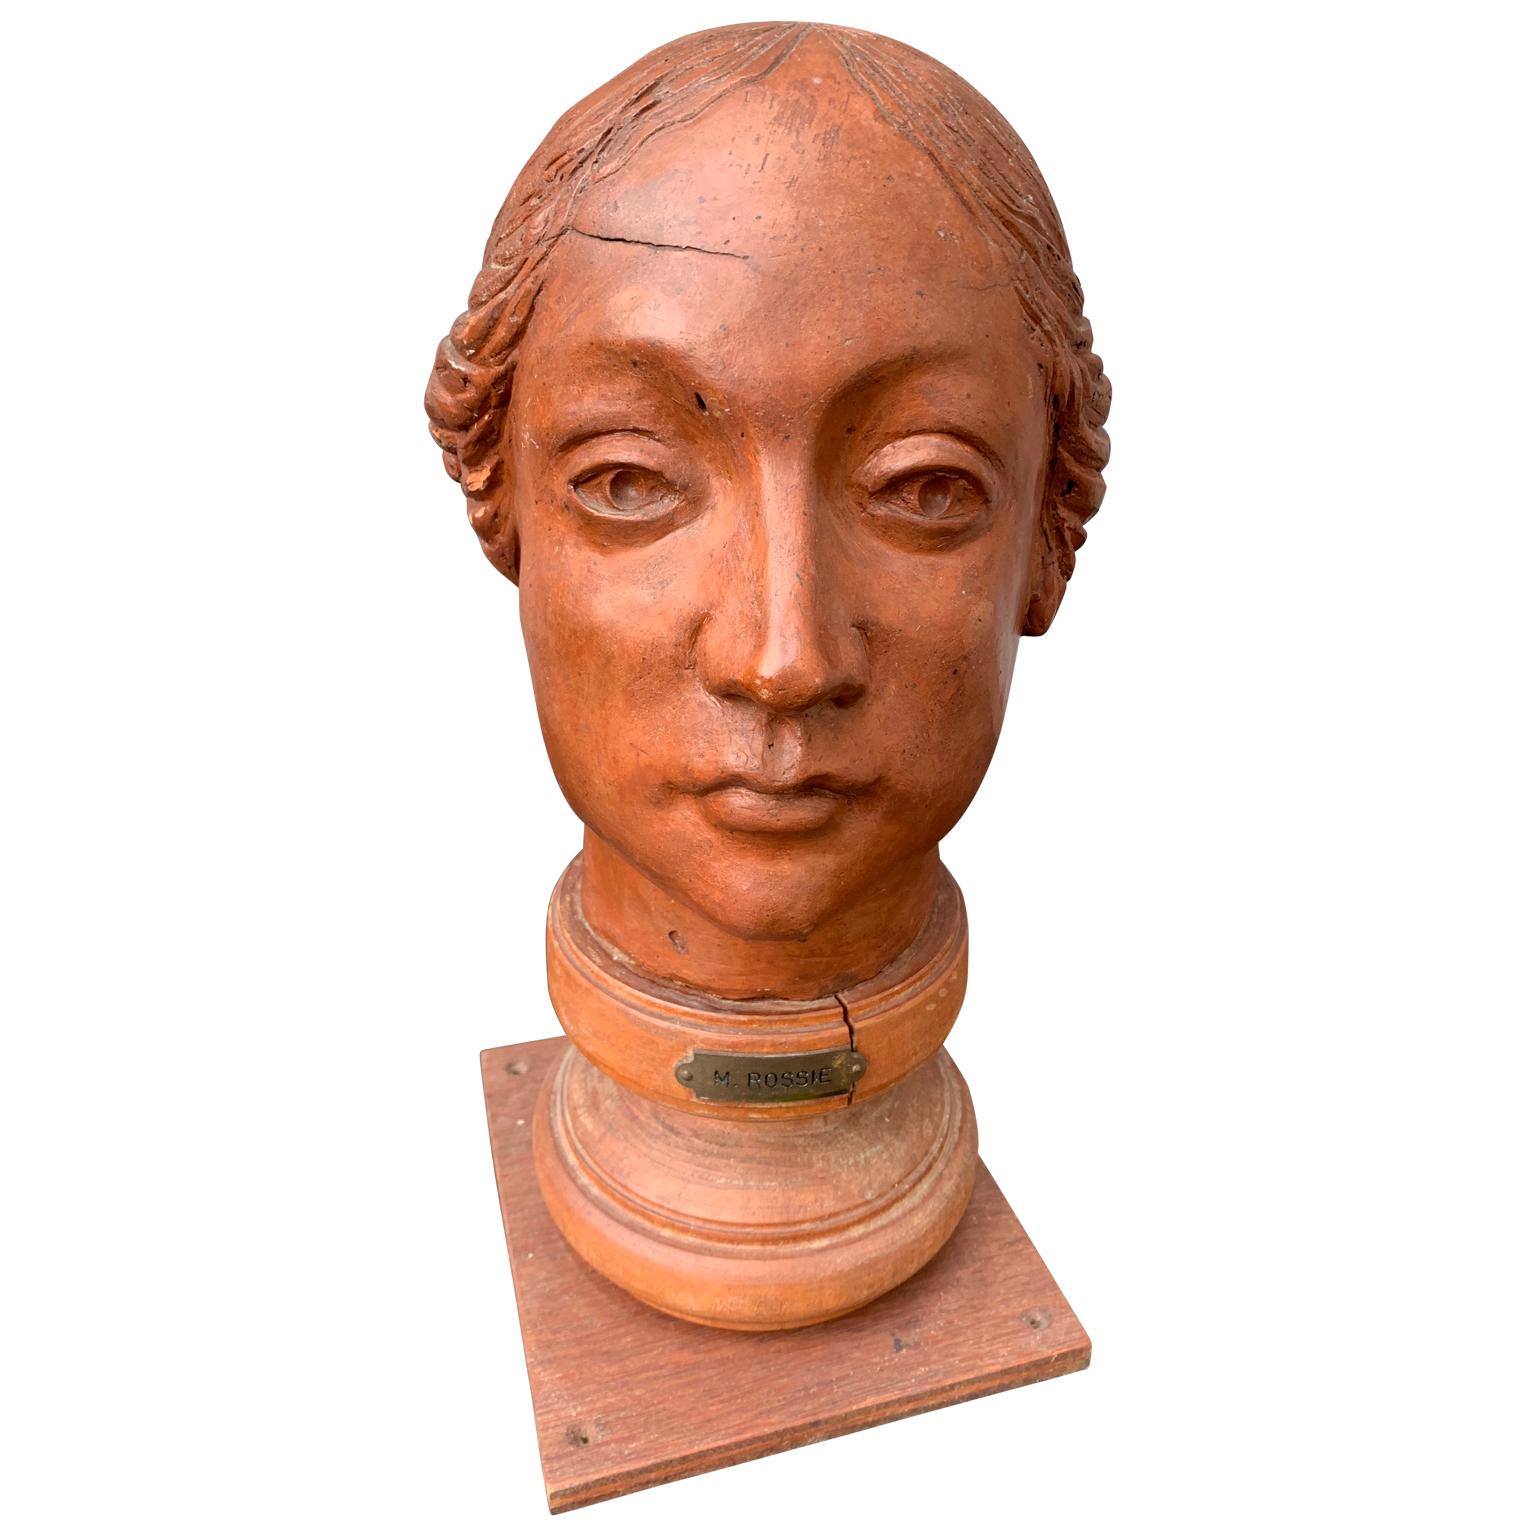 An mid-20th century bust of a woman on a wooden base. Signed with on brass sign 